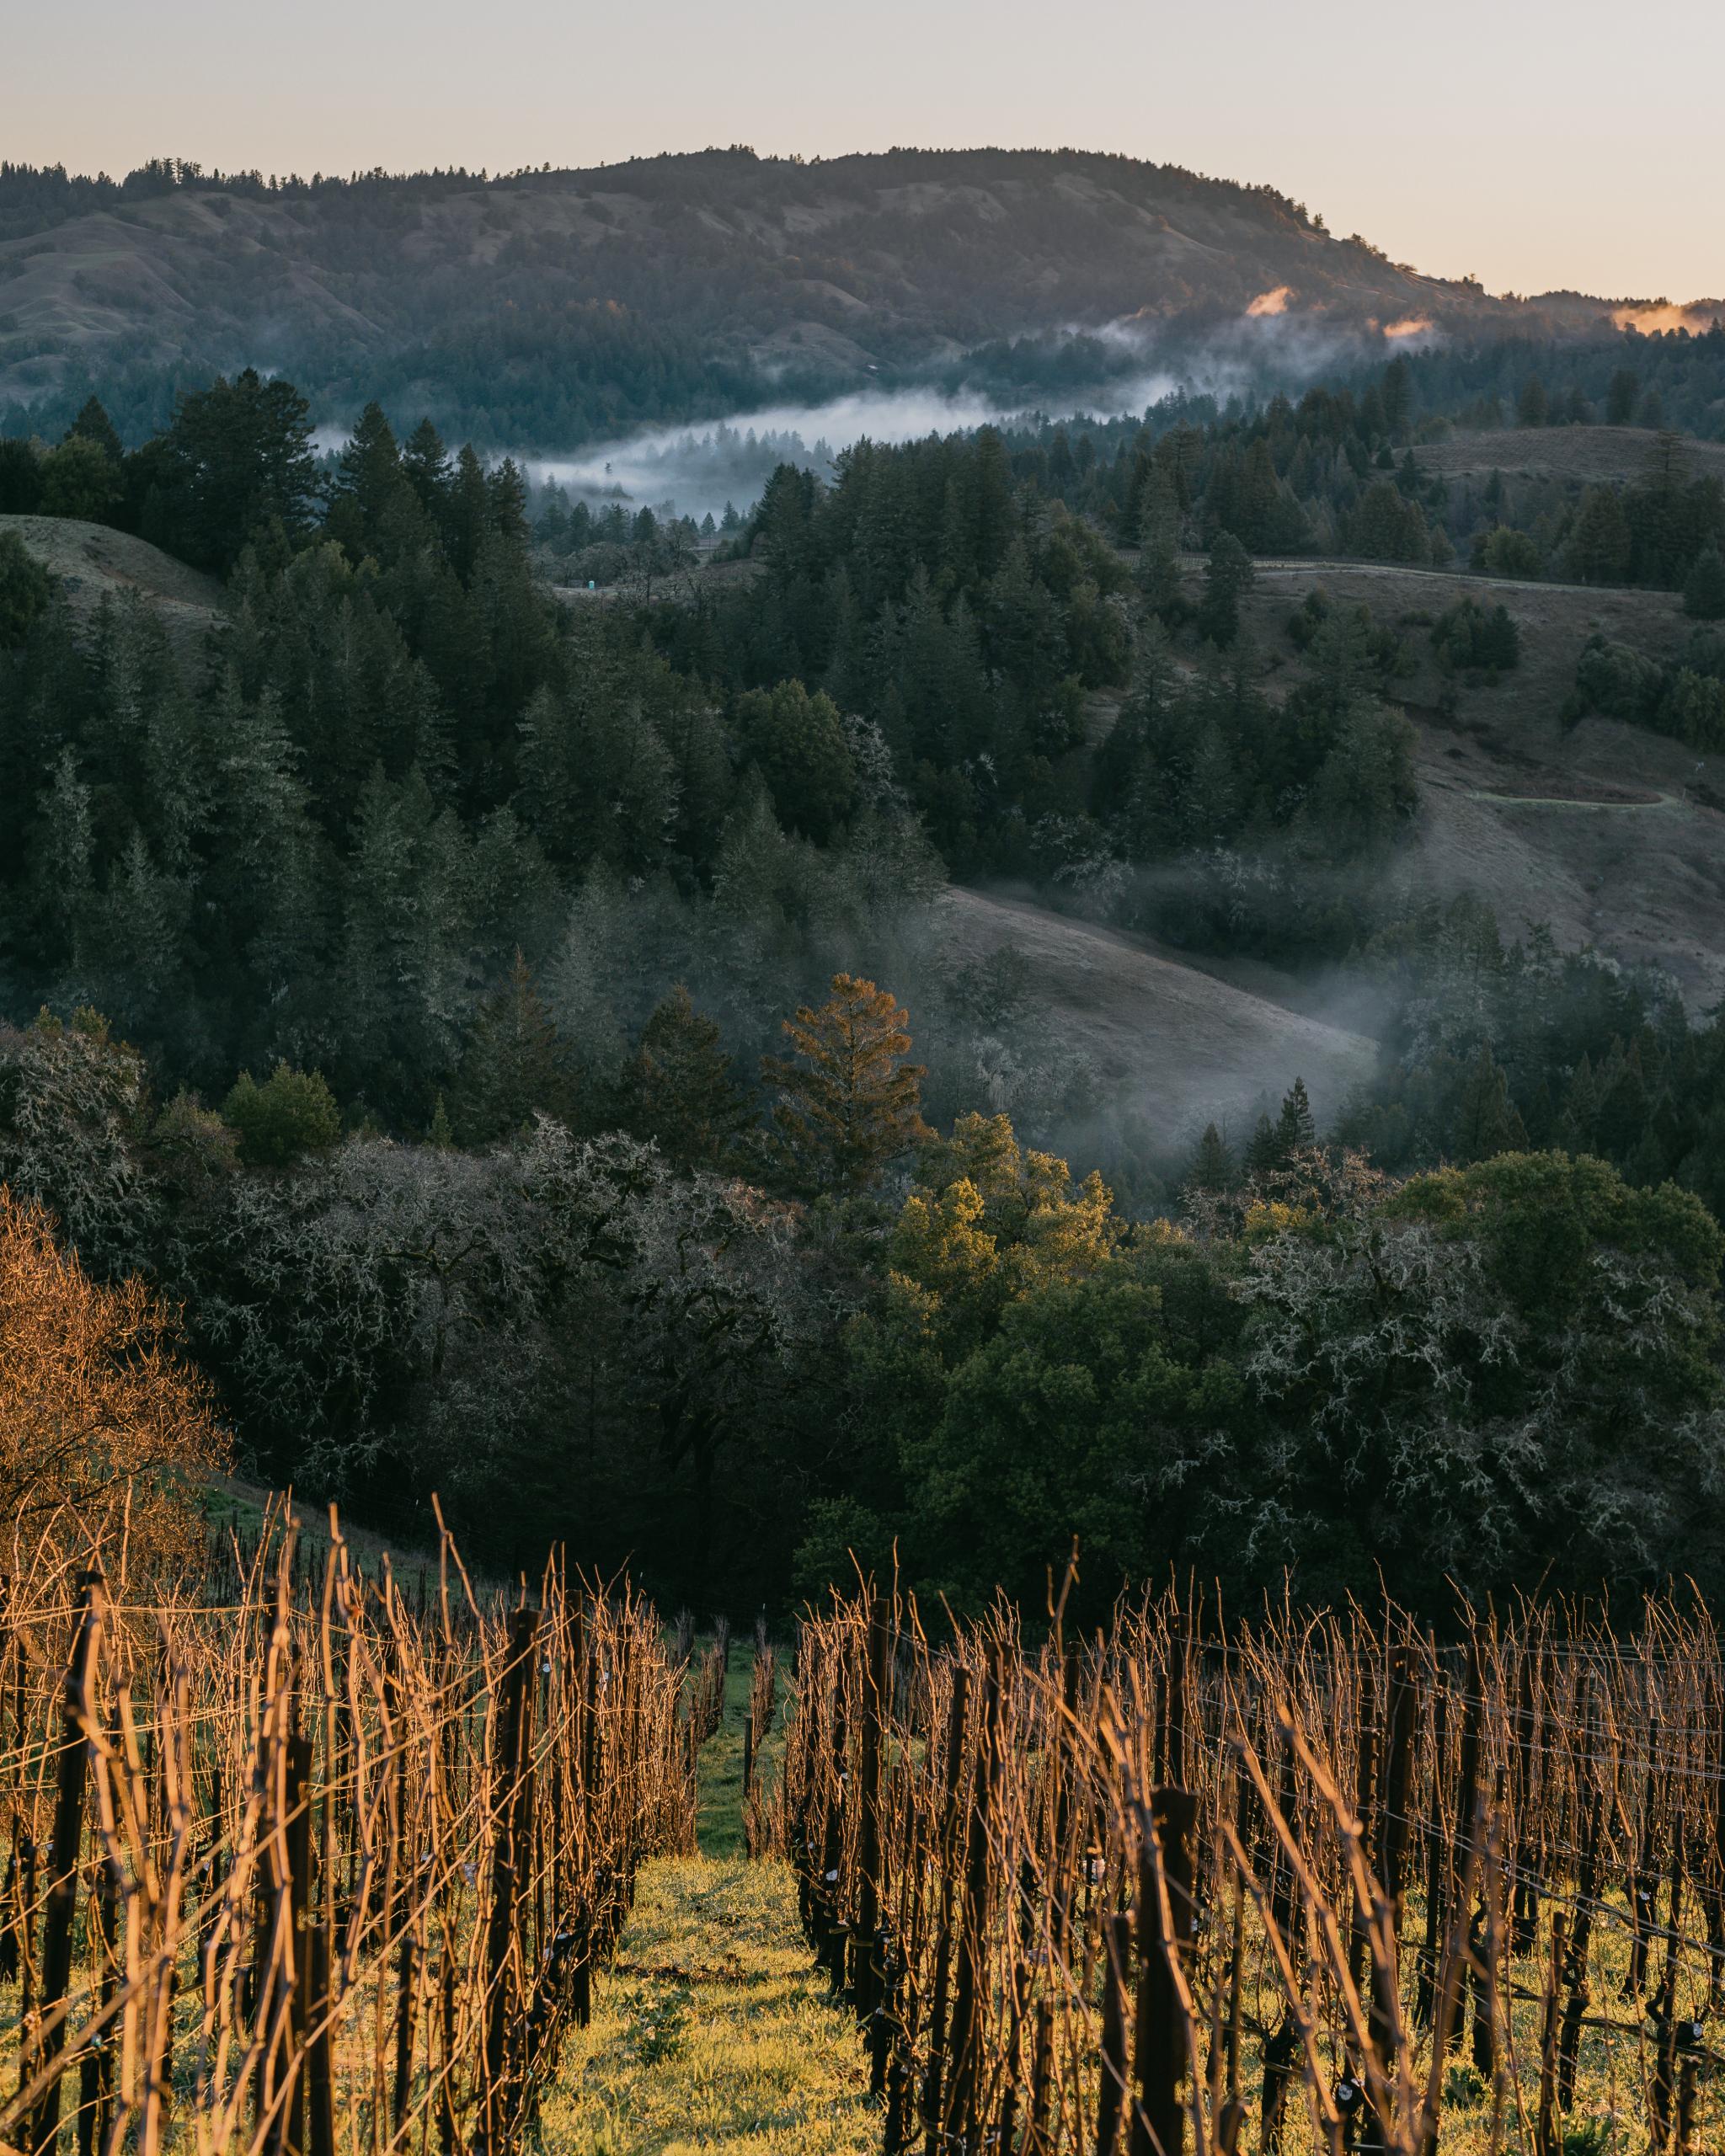 Flowers Vineyards and Winery's Sonoma Coast vineyard in winter. (Sonoma County Tourism)